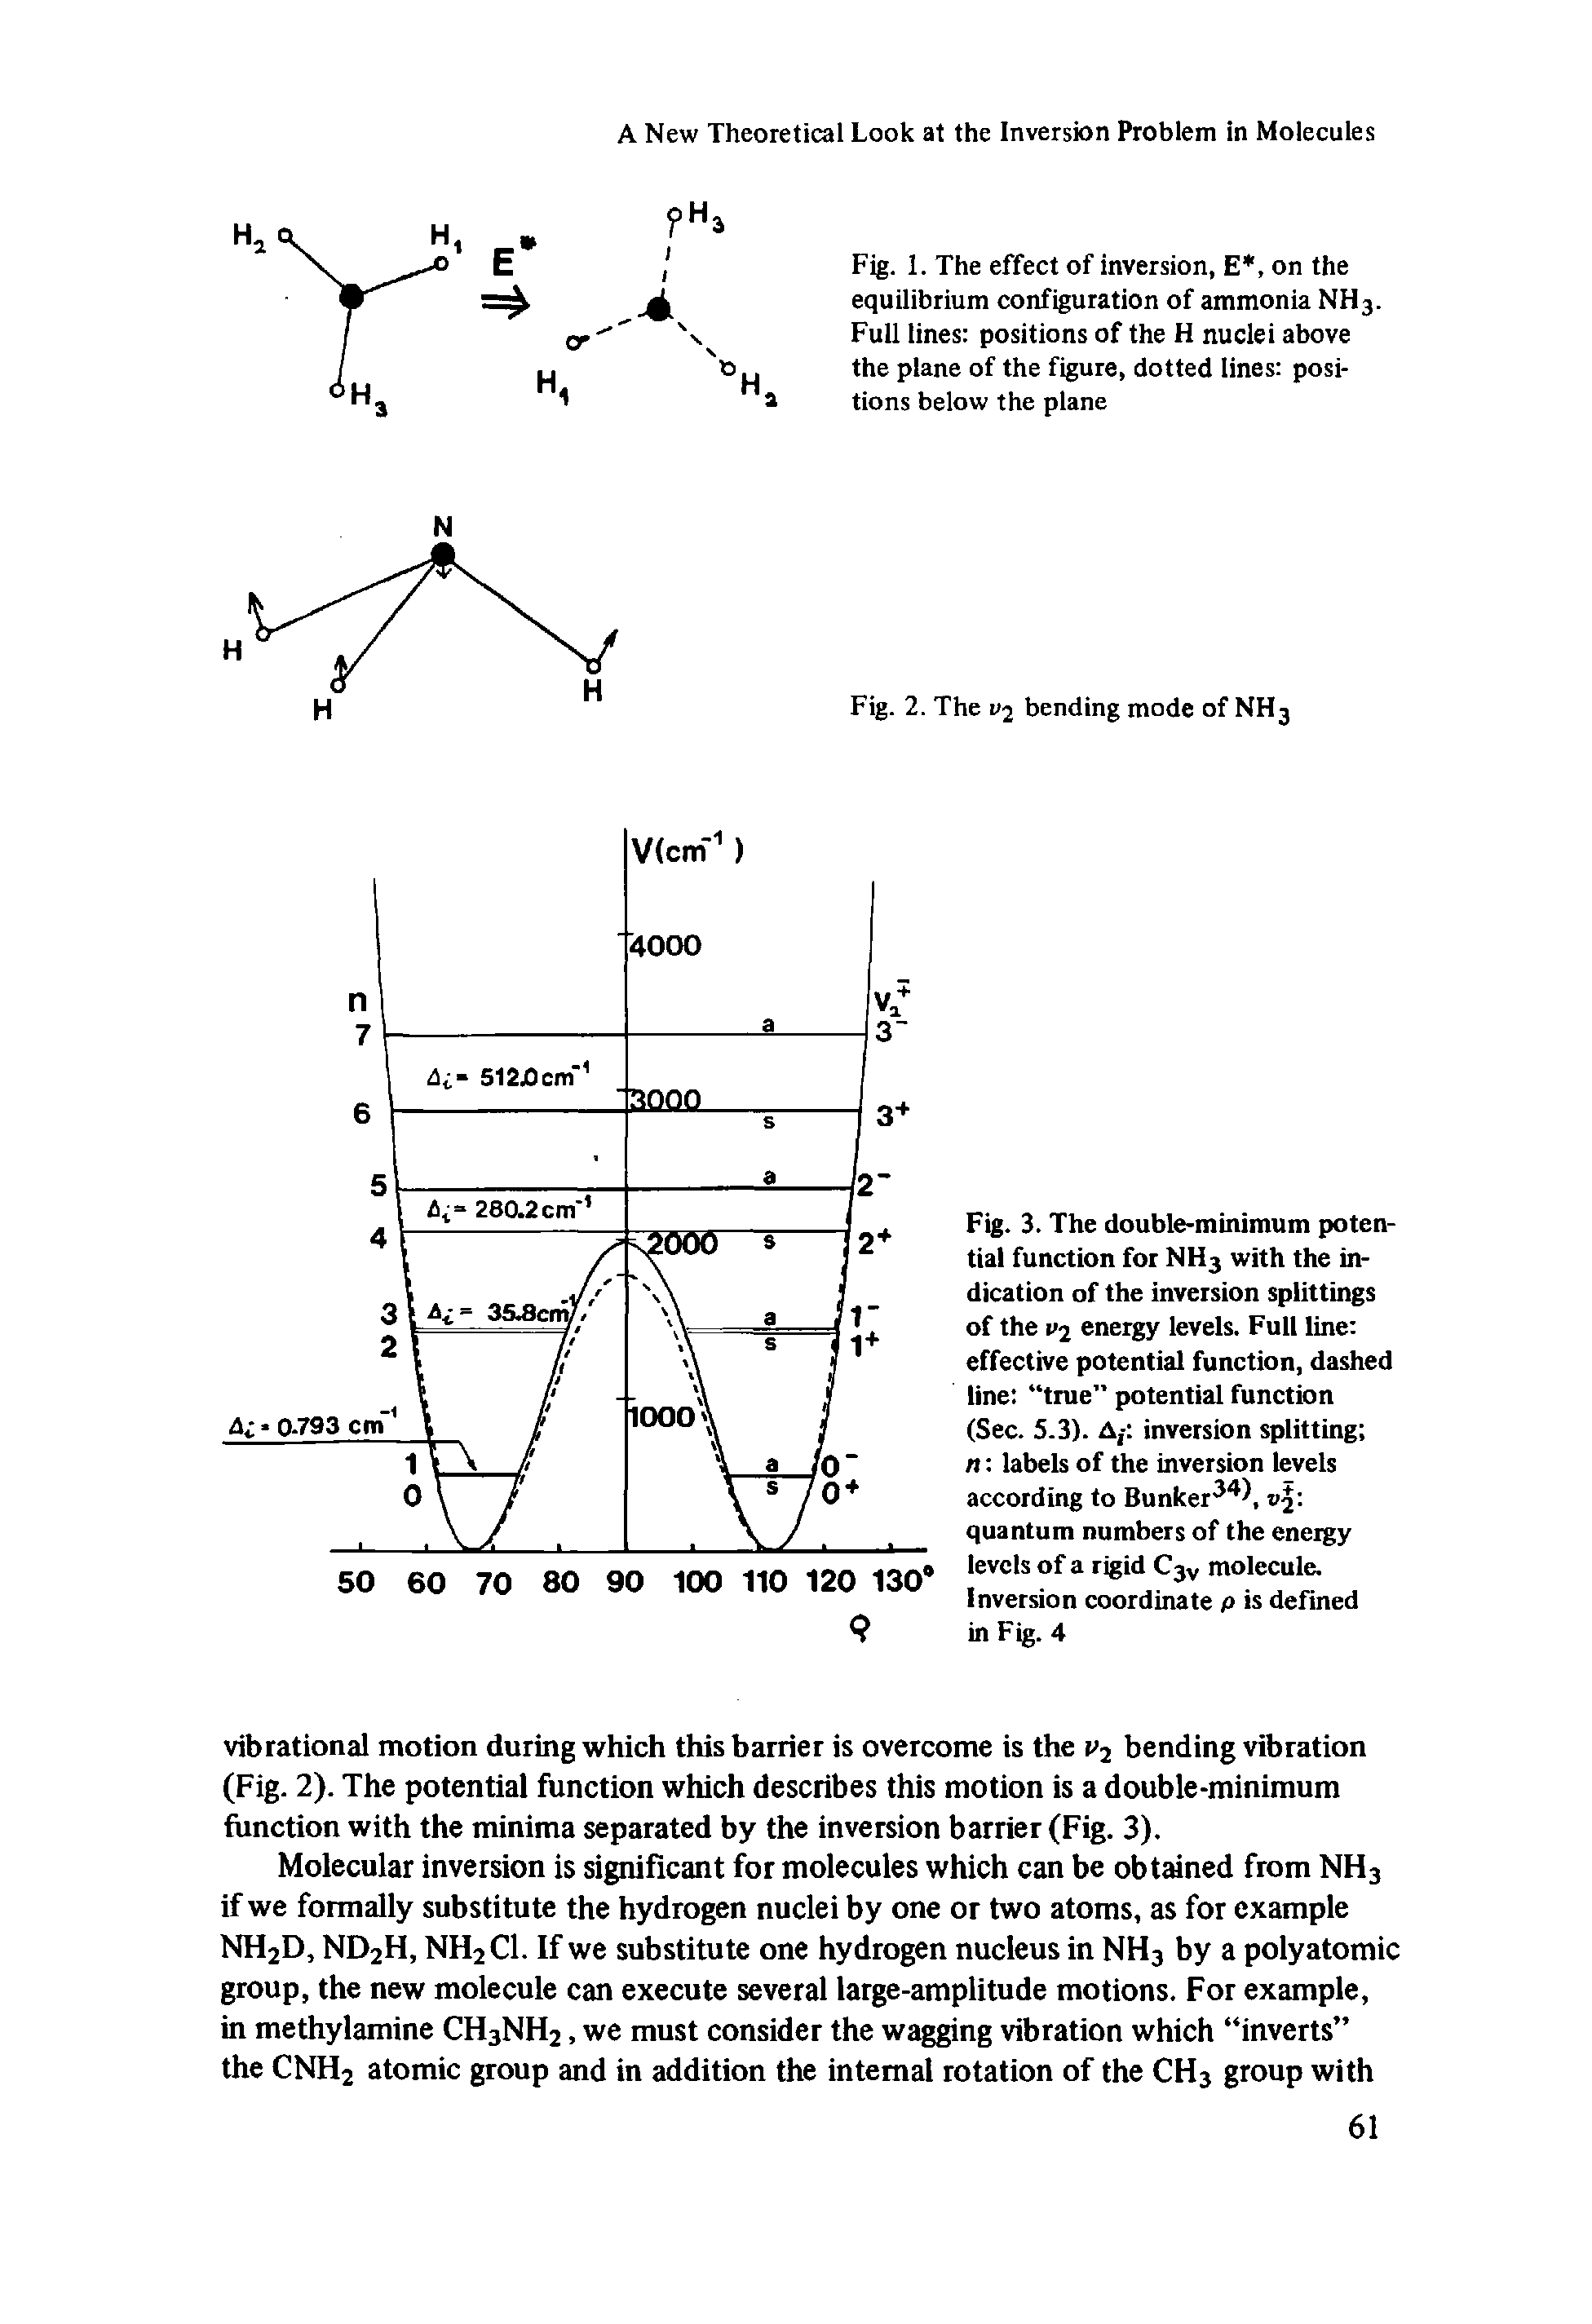 Fig. 3. The double-minimum potential function for NH3 with the indication of the inversion splittings of the i 2 energy levels. Full line effective potential function, dashed line true" potential function (Sec. 5.3). A,- inversion splitting n labels of the inversion levels according to Bunker, v -quantum numbers of the energy levels of a rigid C3V molecule. Inversion coordinate p is defined in Fig. 4...